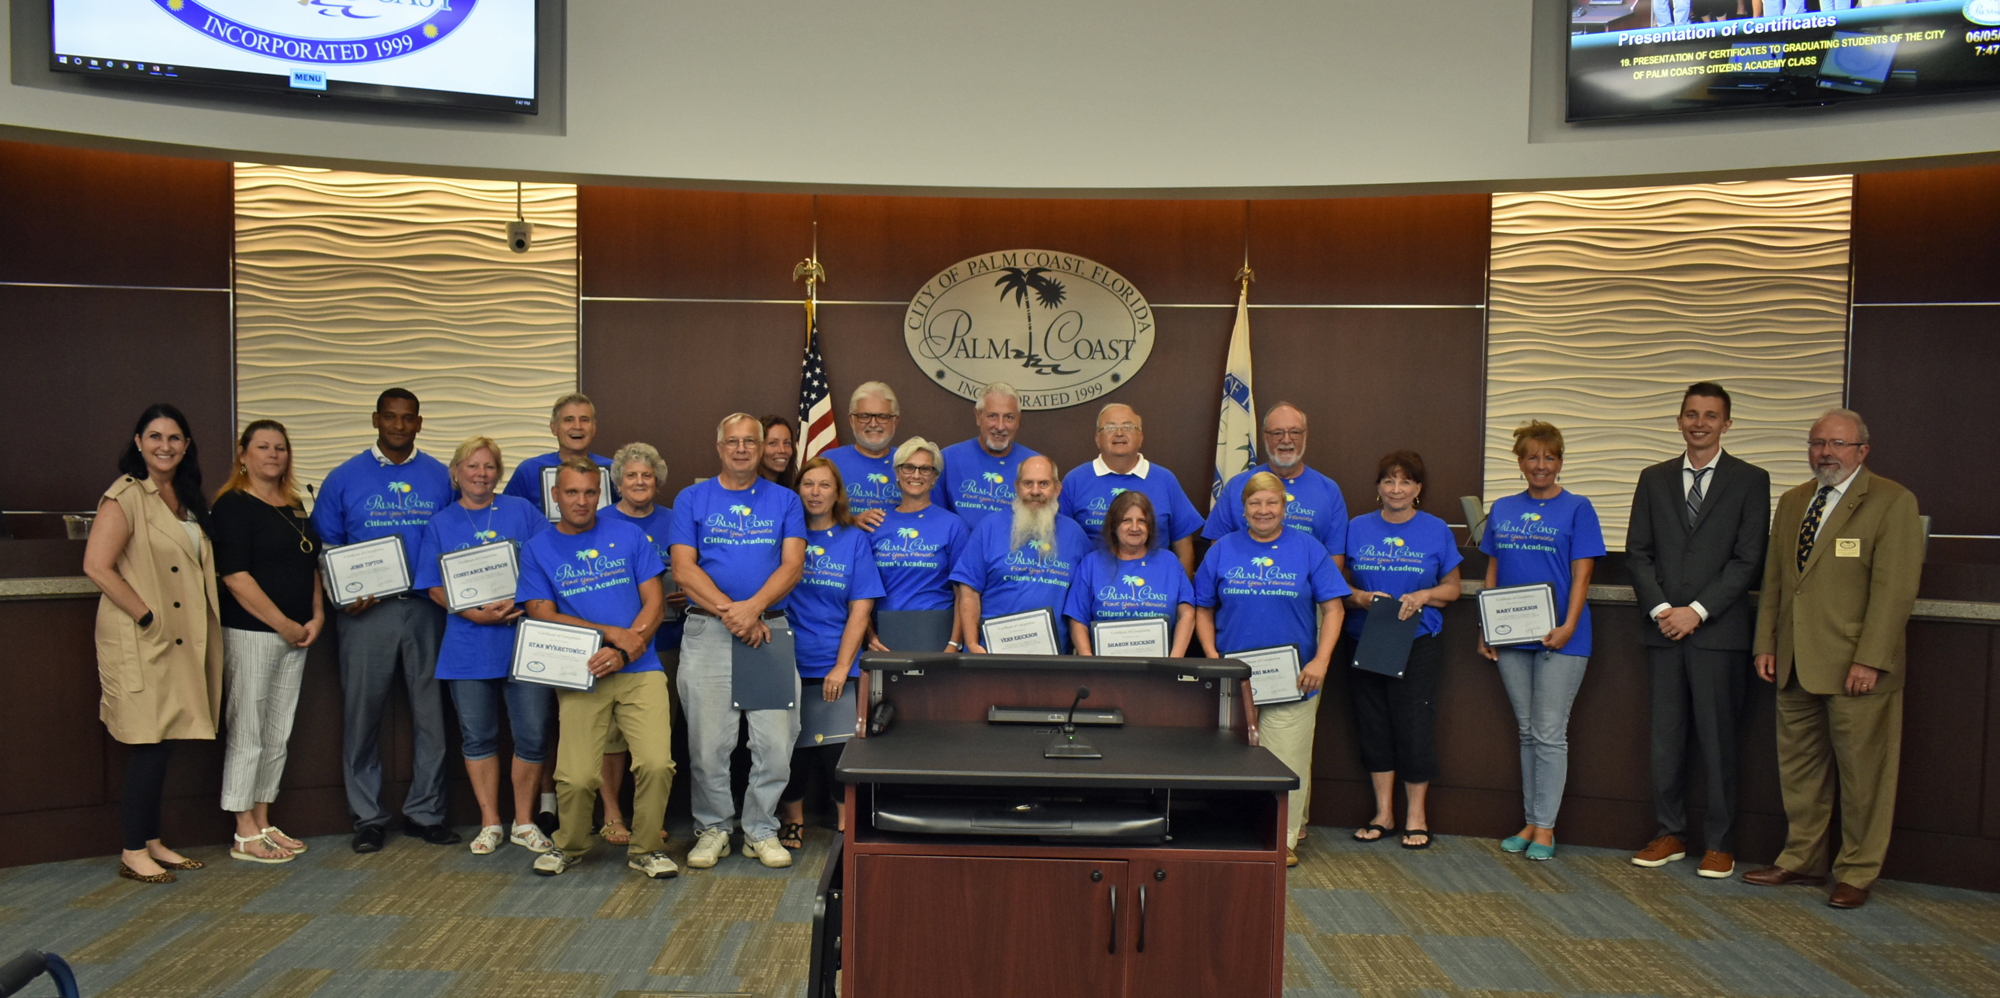 Eighteen Palm Coast residents graduated in June from the Palm Coast Citizen’s Academy. Photo courtesy of Cindi Lane